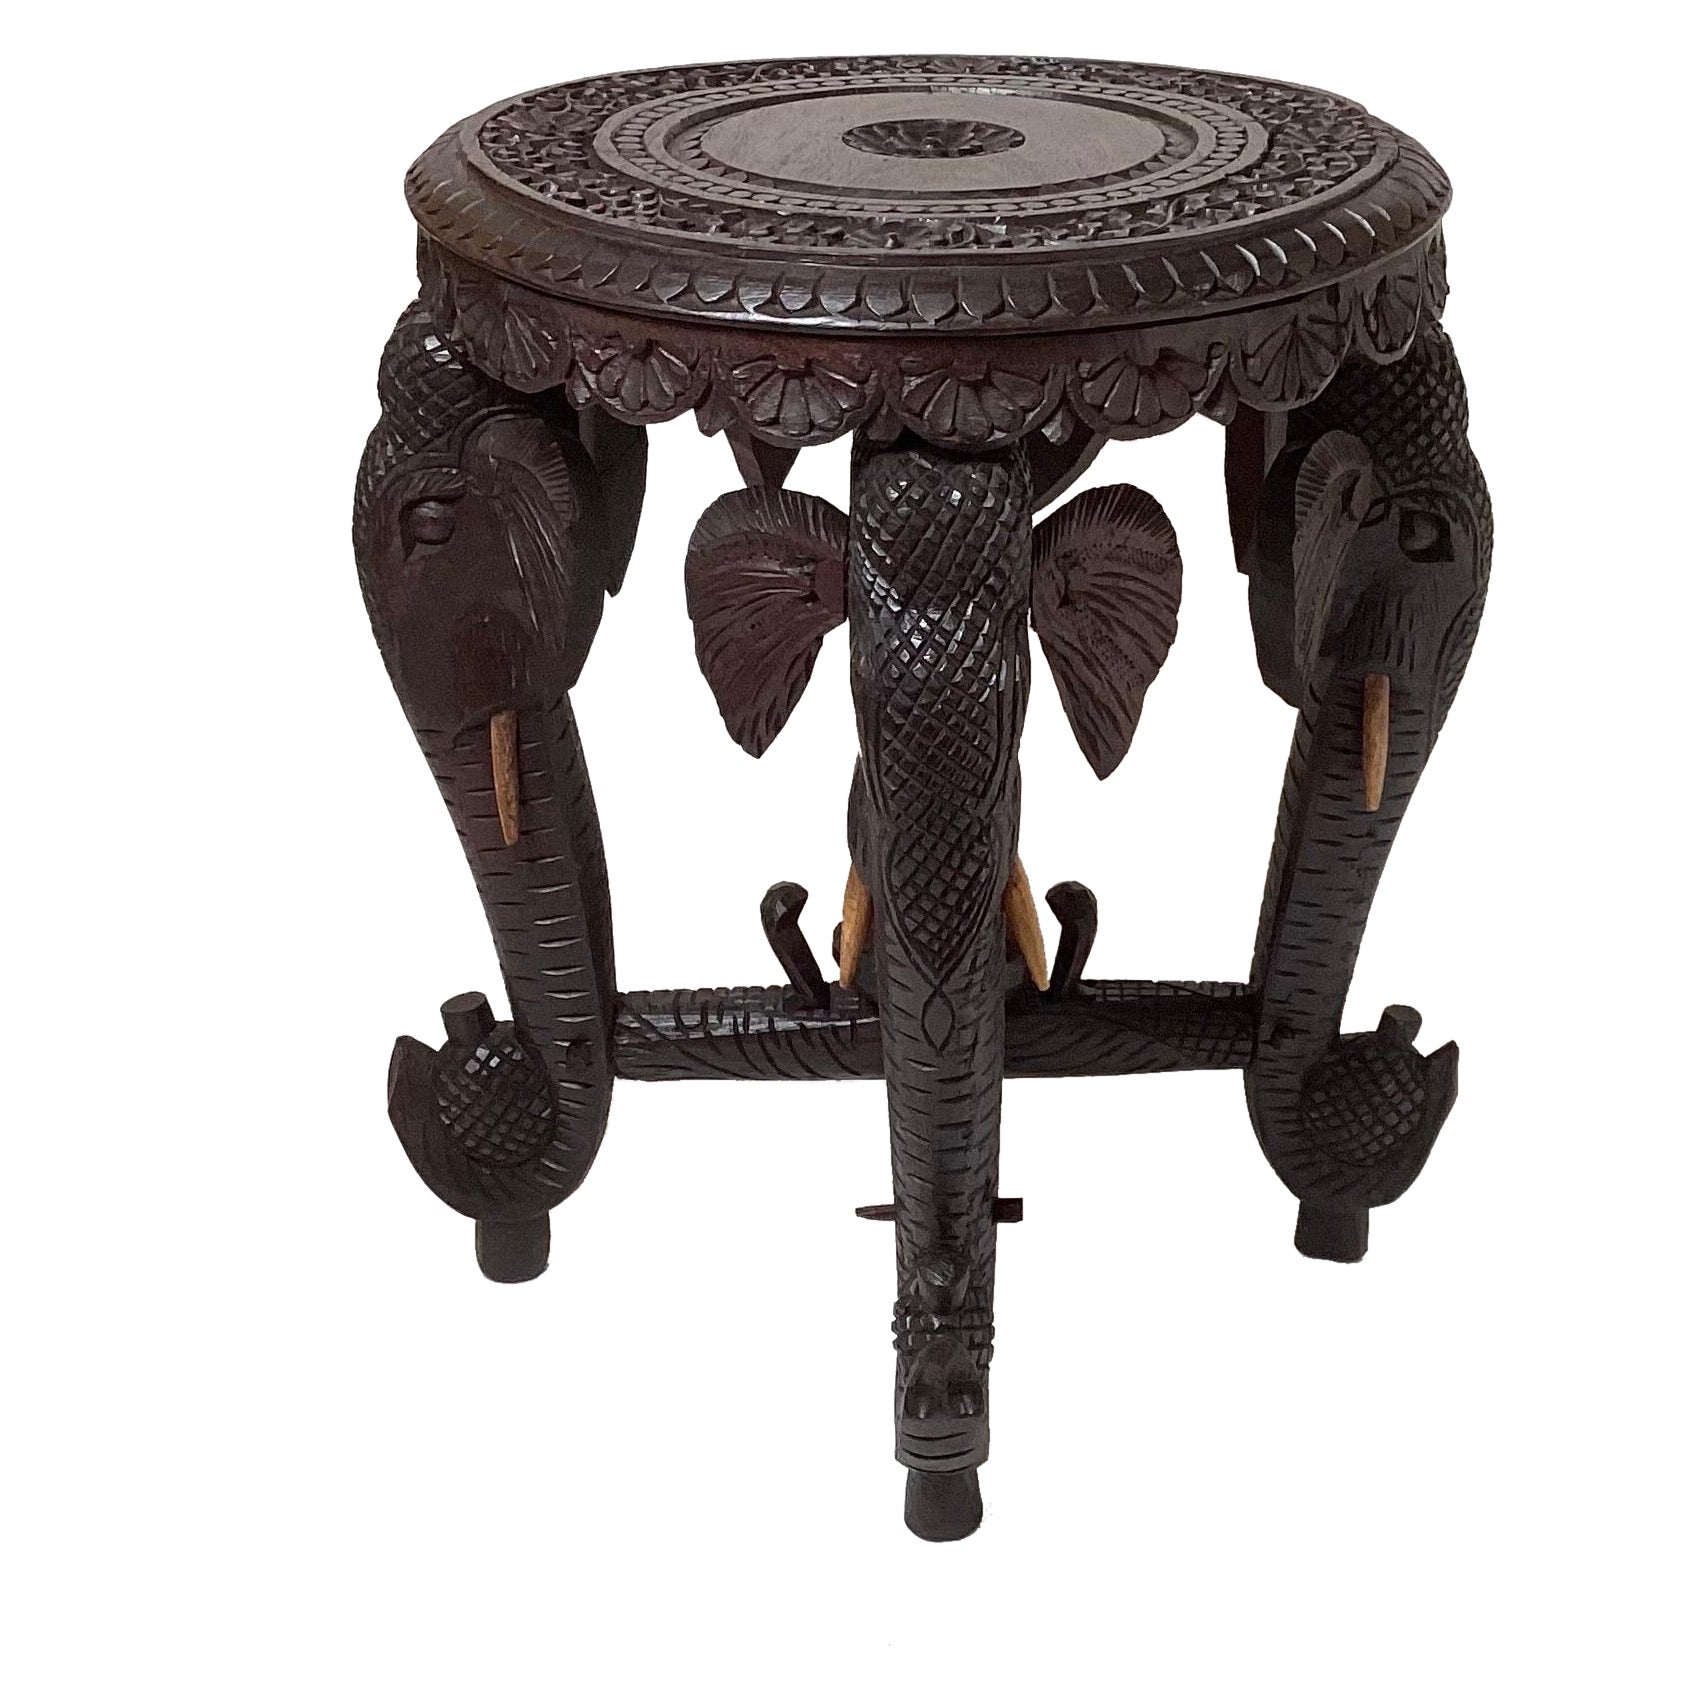 19th Century Burmese Carved Hardwood Elephant Form Table, Stand For Sale